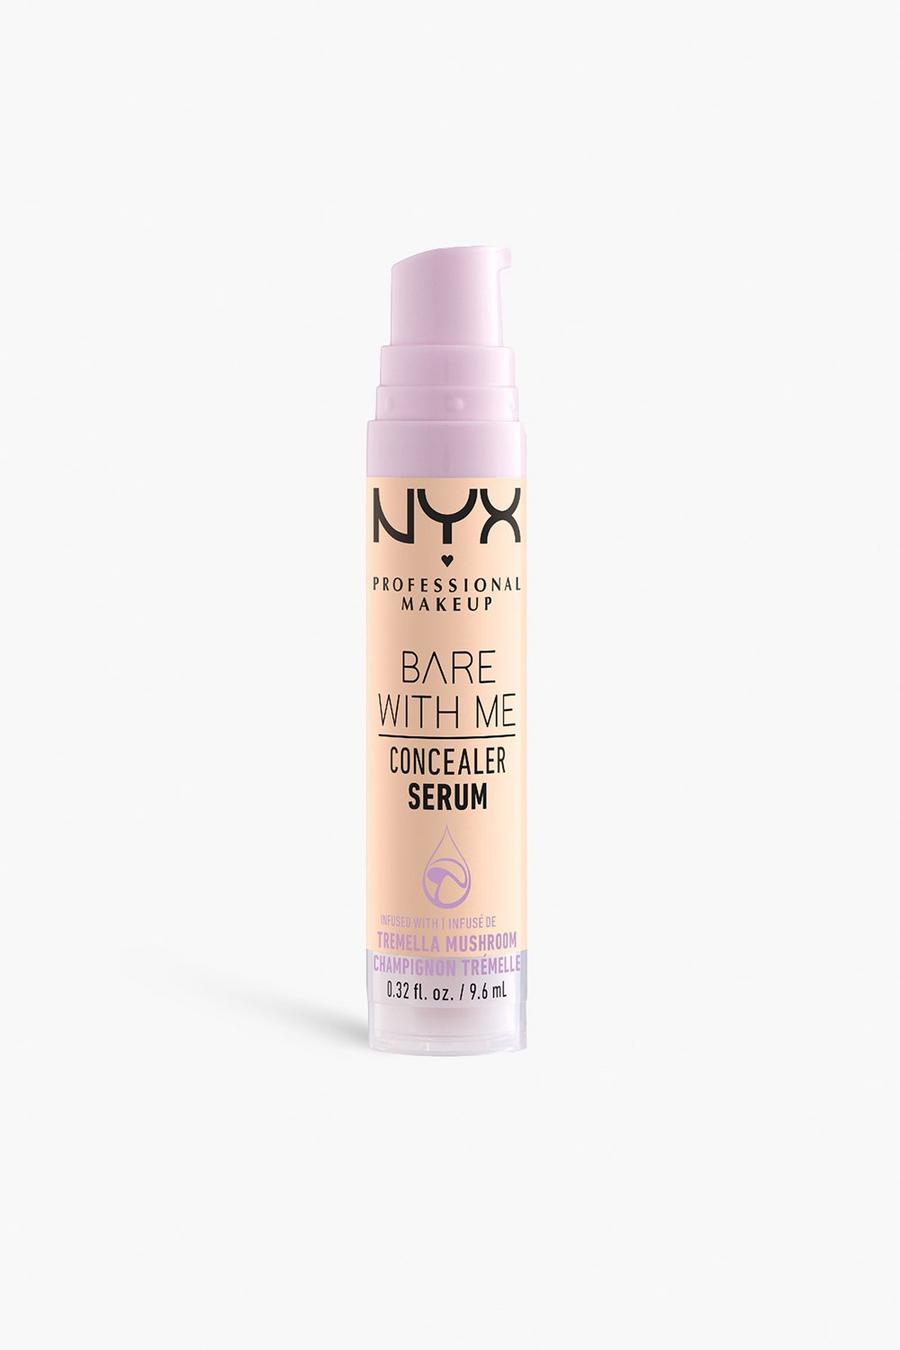 01 fair NYX Professional Makeup Bare With Me Concealer Serum